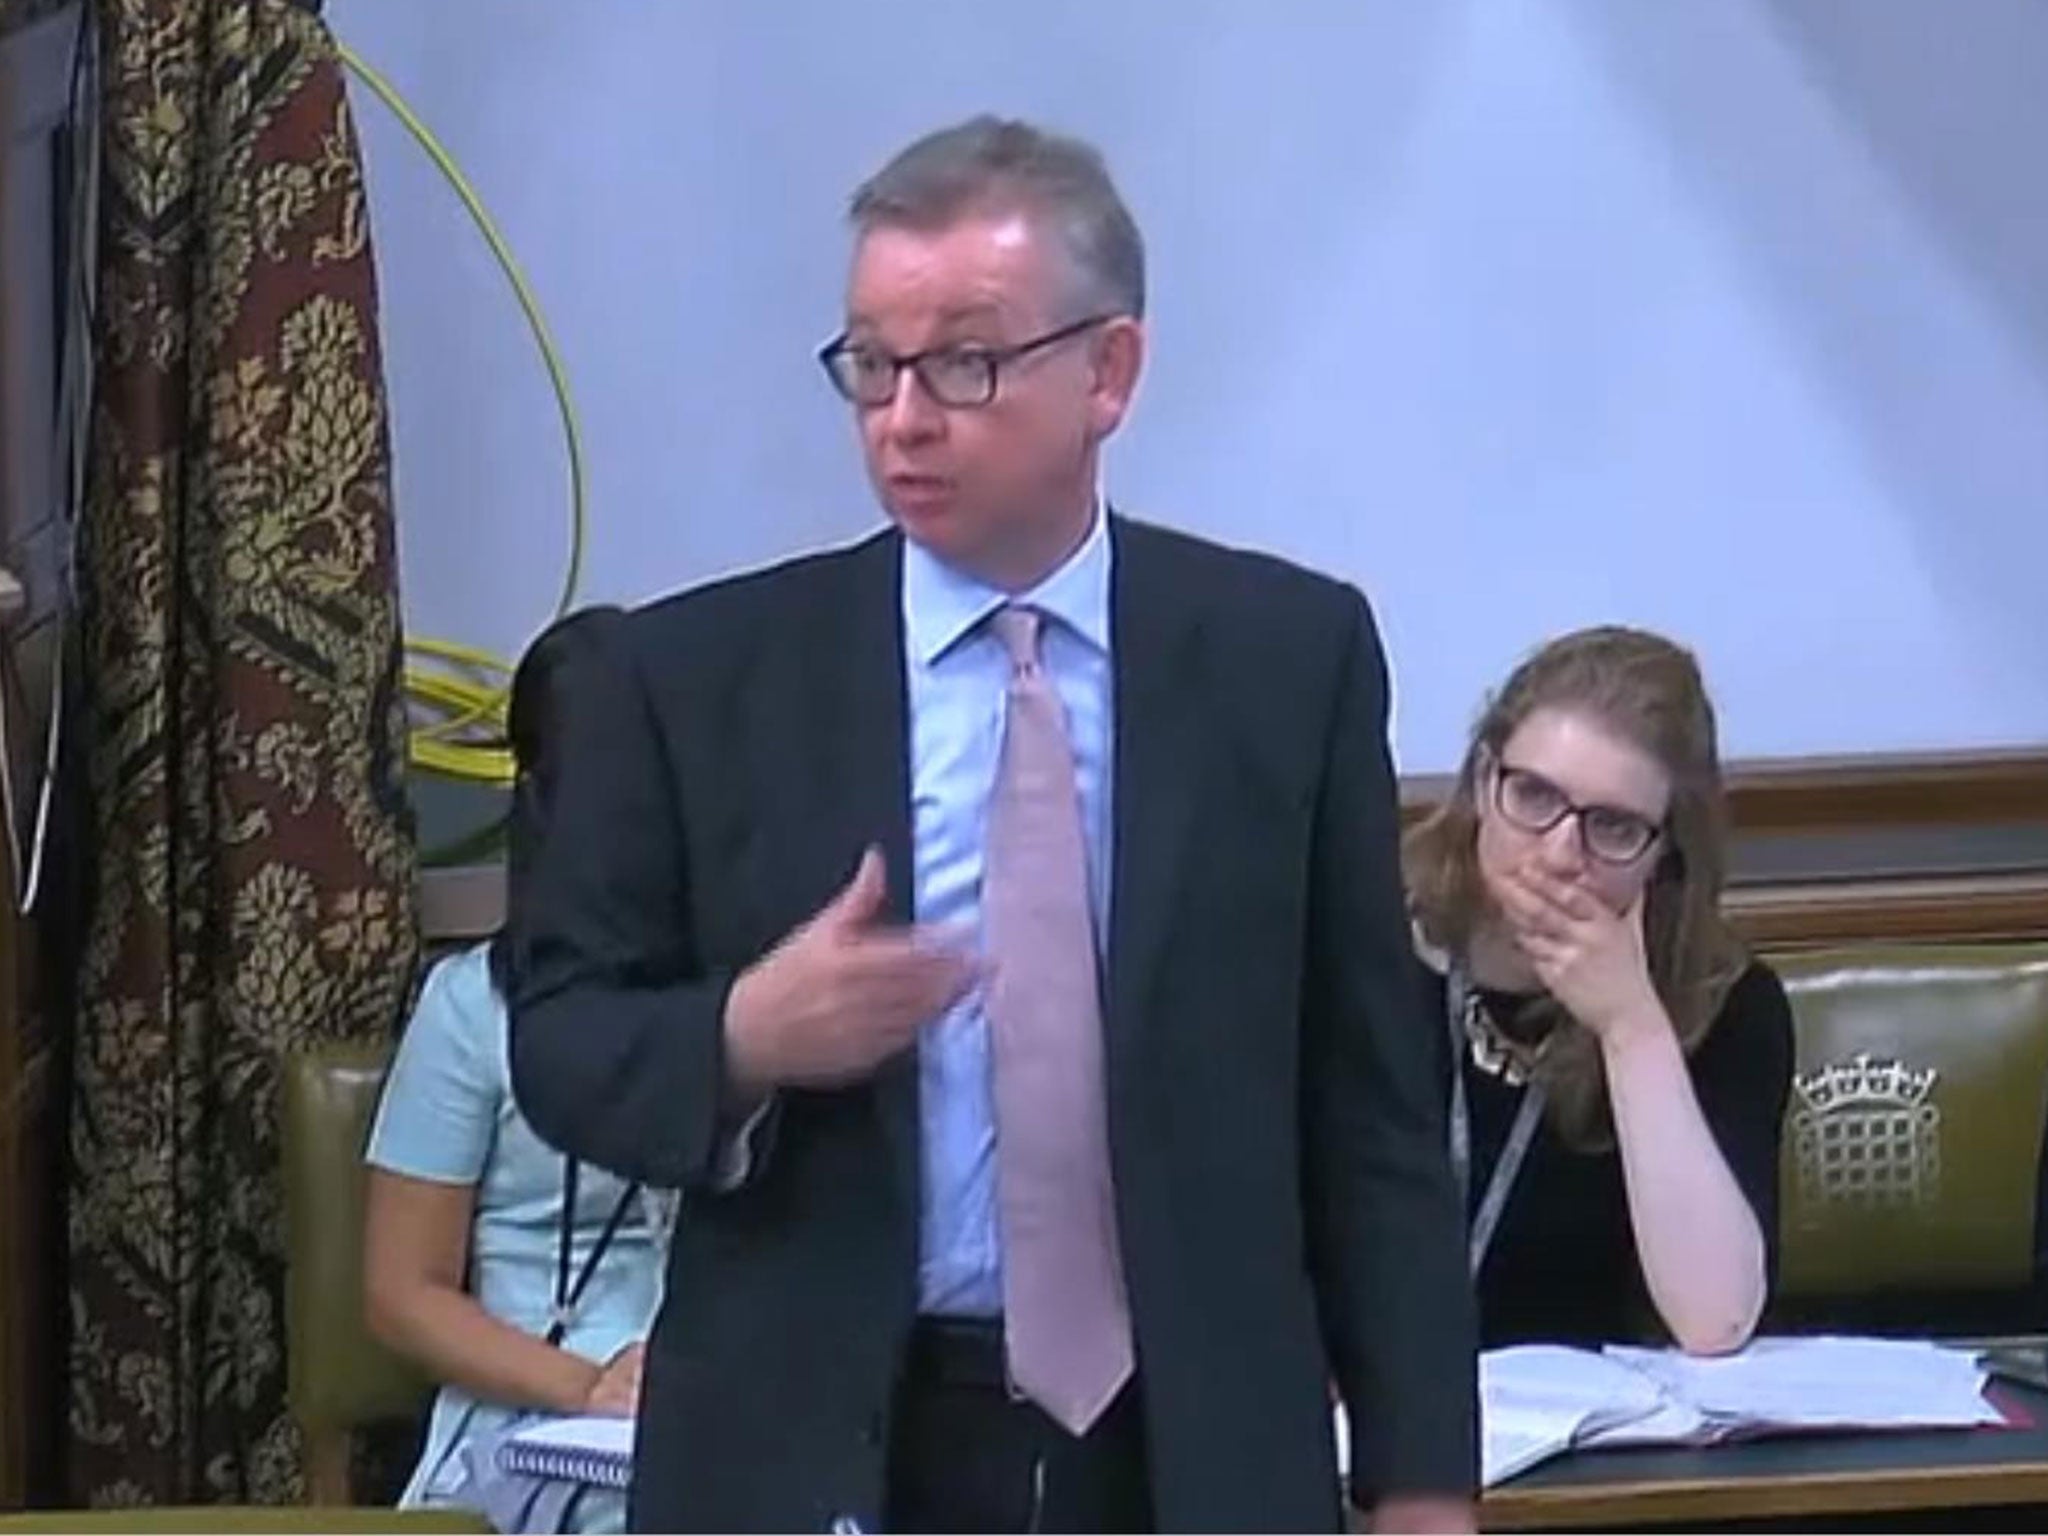 Michael Gove giving a speech at Westminster Hall on 6 September